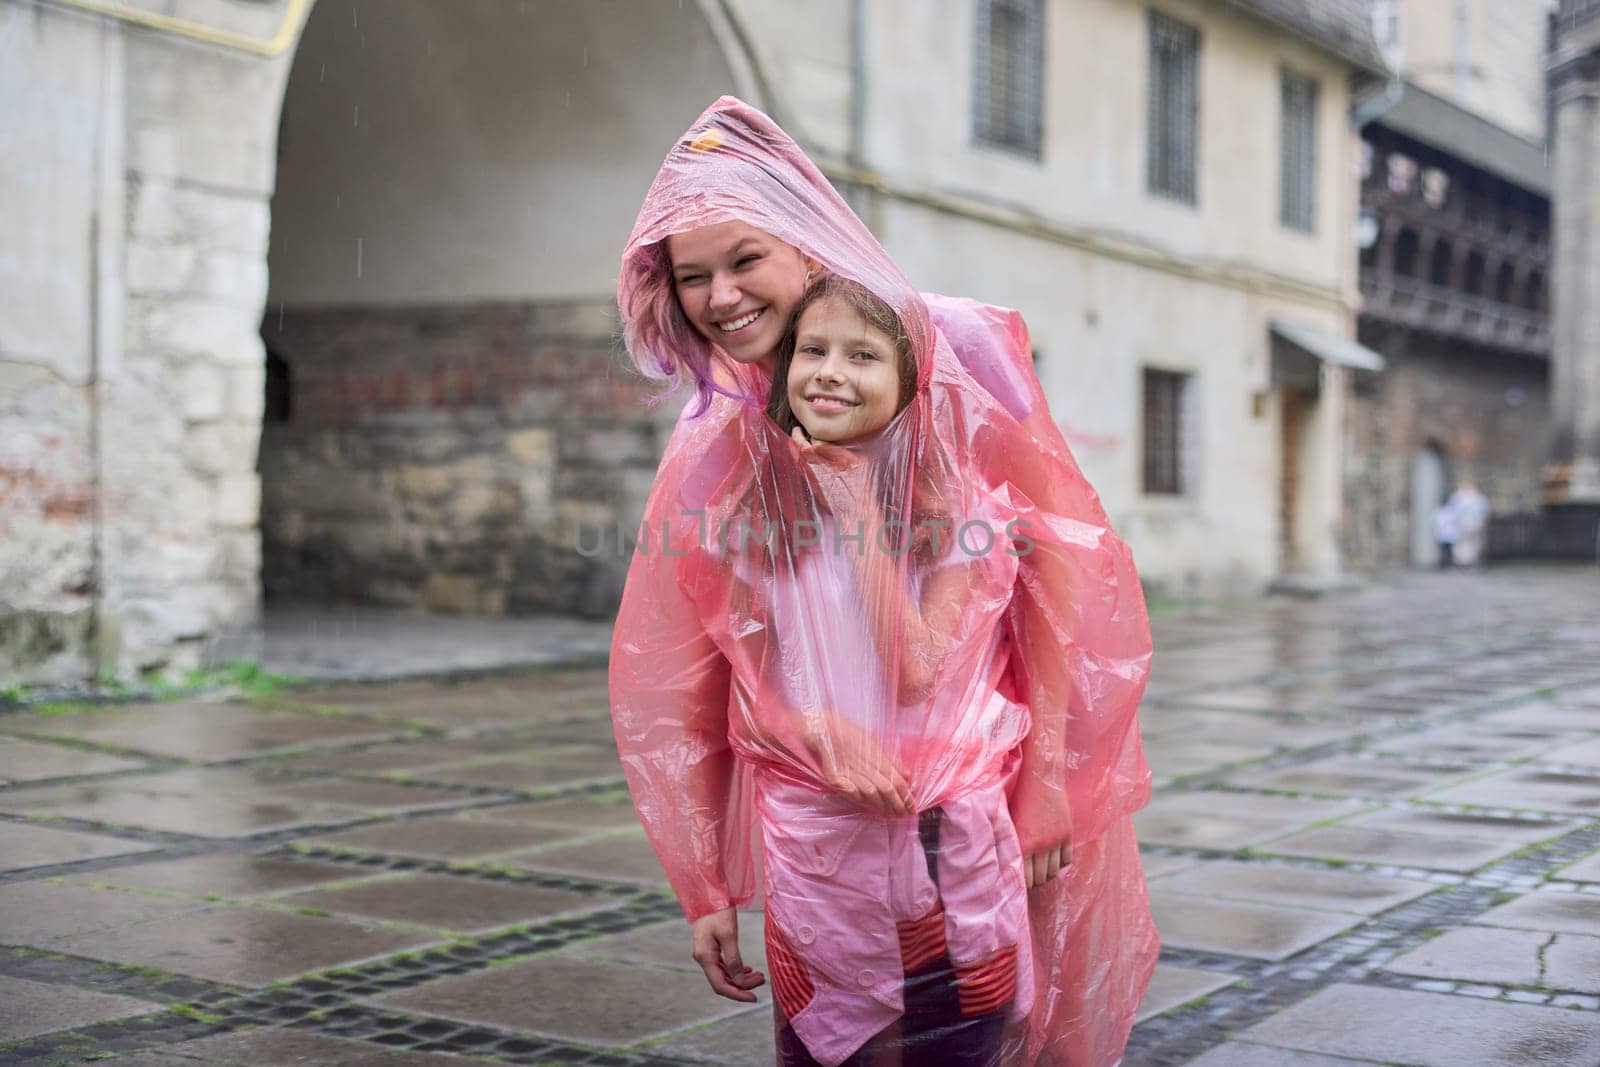 Girls children walking in the tourist city in the rain dressed in a raincoat